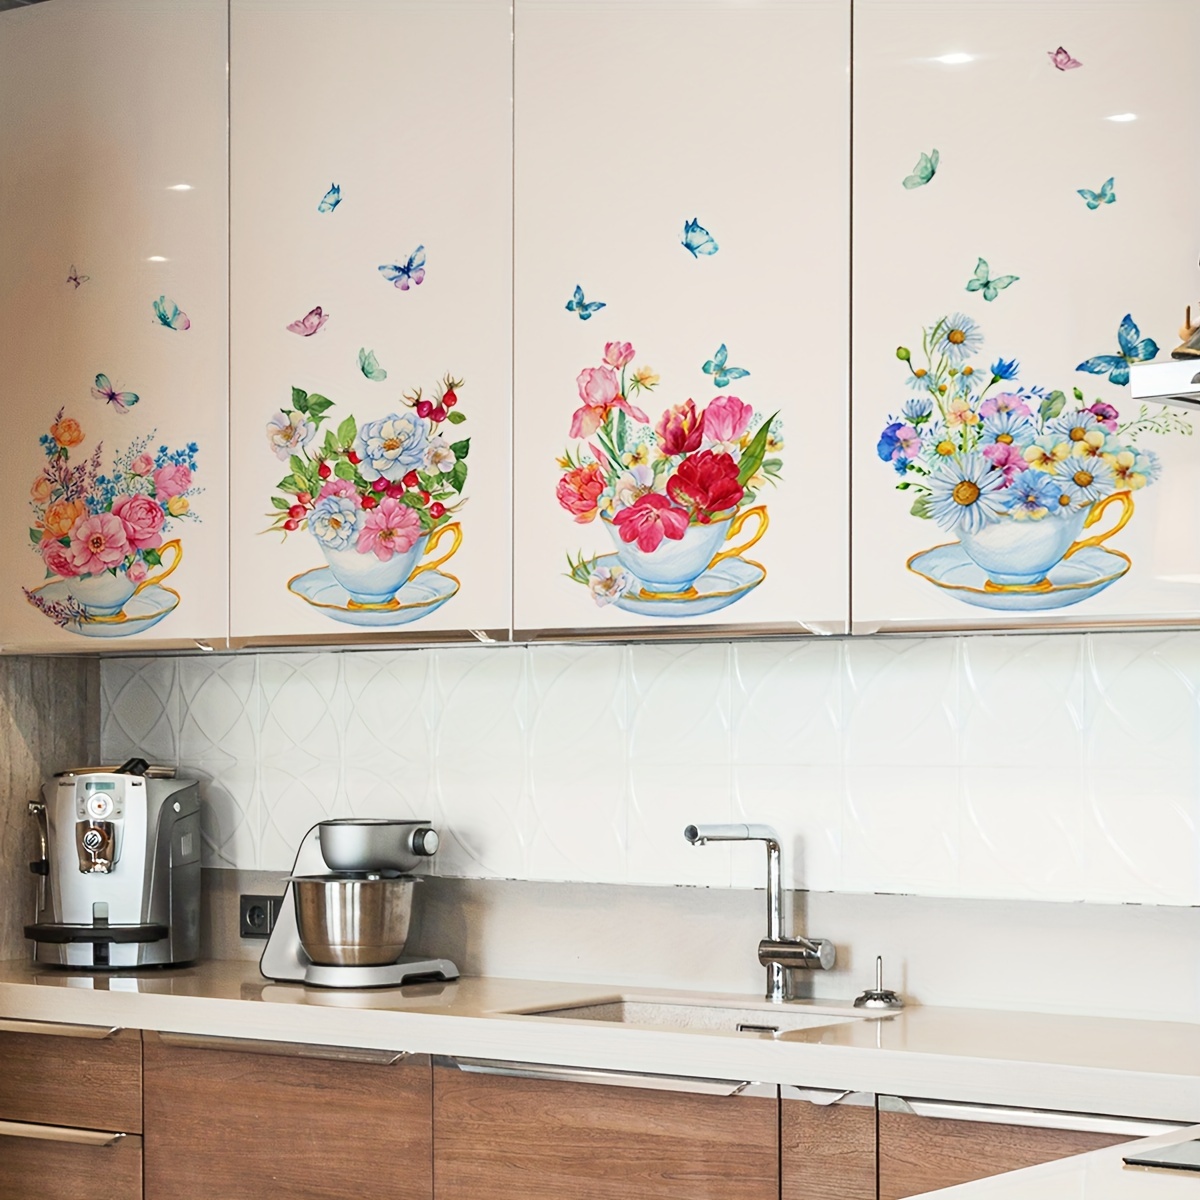 

4pcs, Green Plant Flowers Butterfly Creative Wall Stickers, Kitchen Living Room Landscaping Decorative Wall Stickers, Self-adhesive Wall Stickers